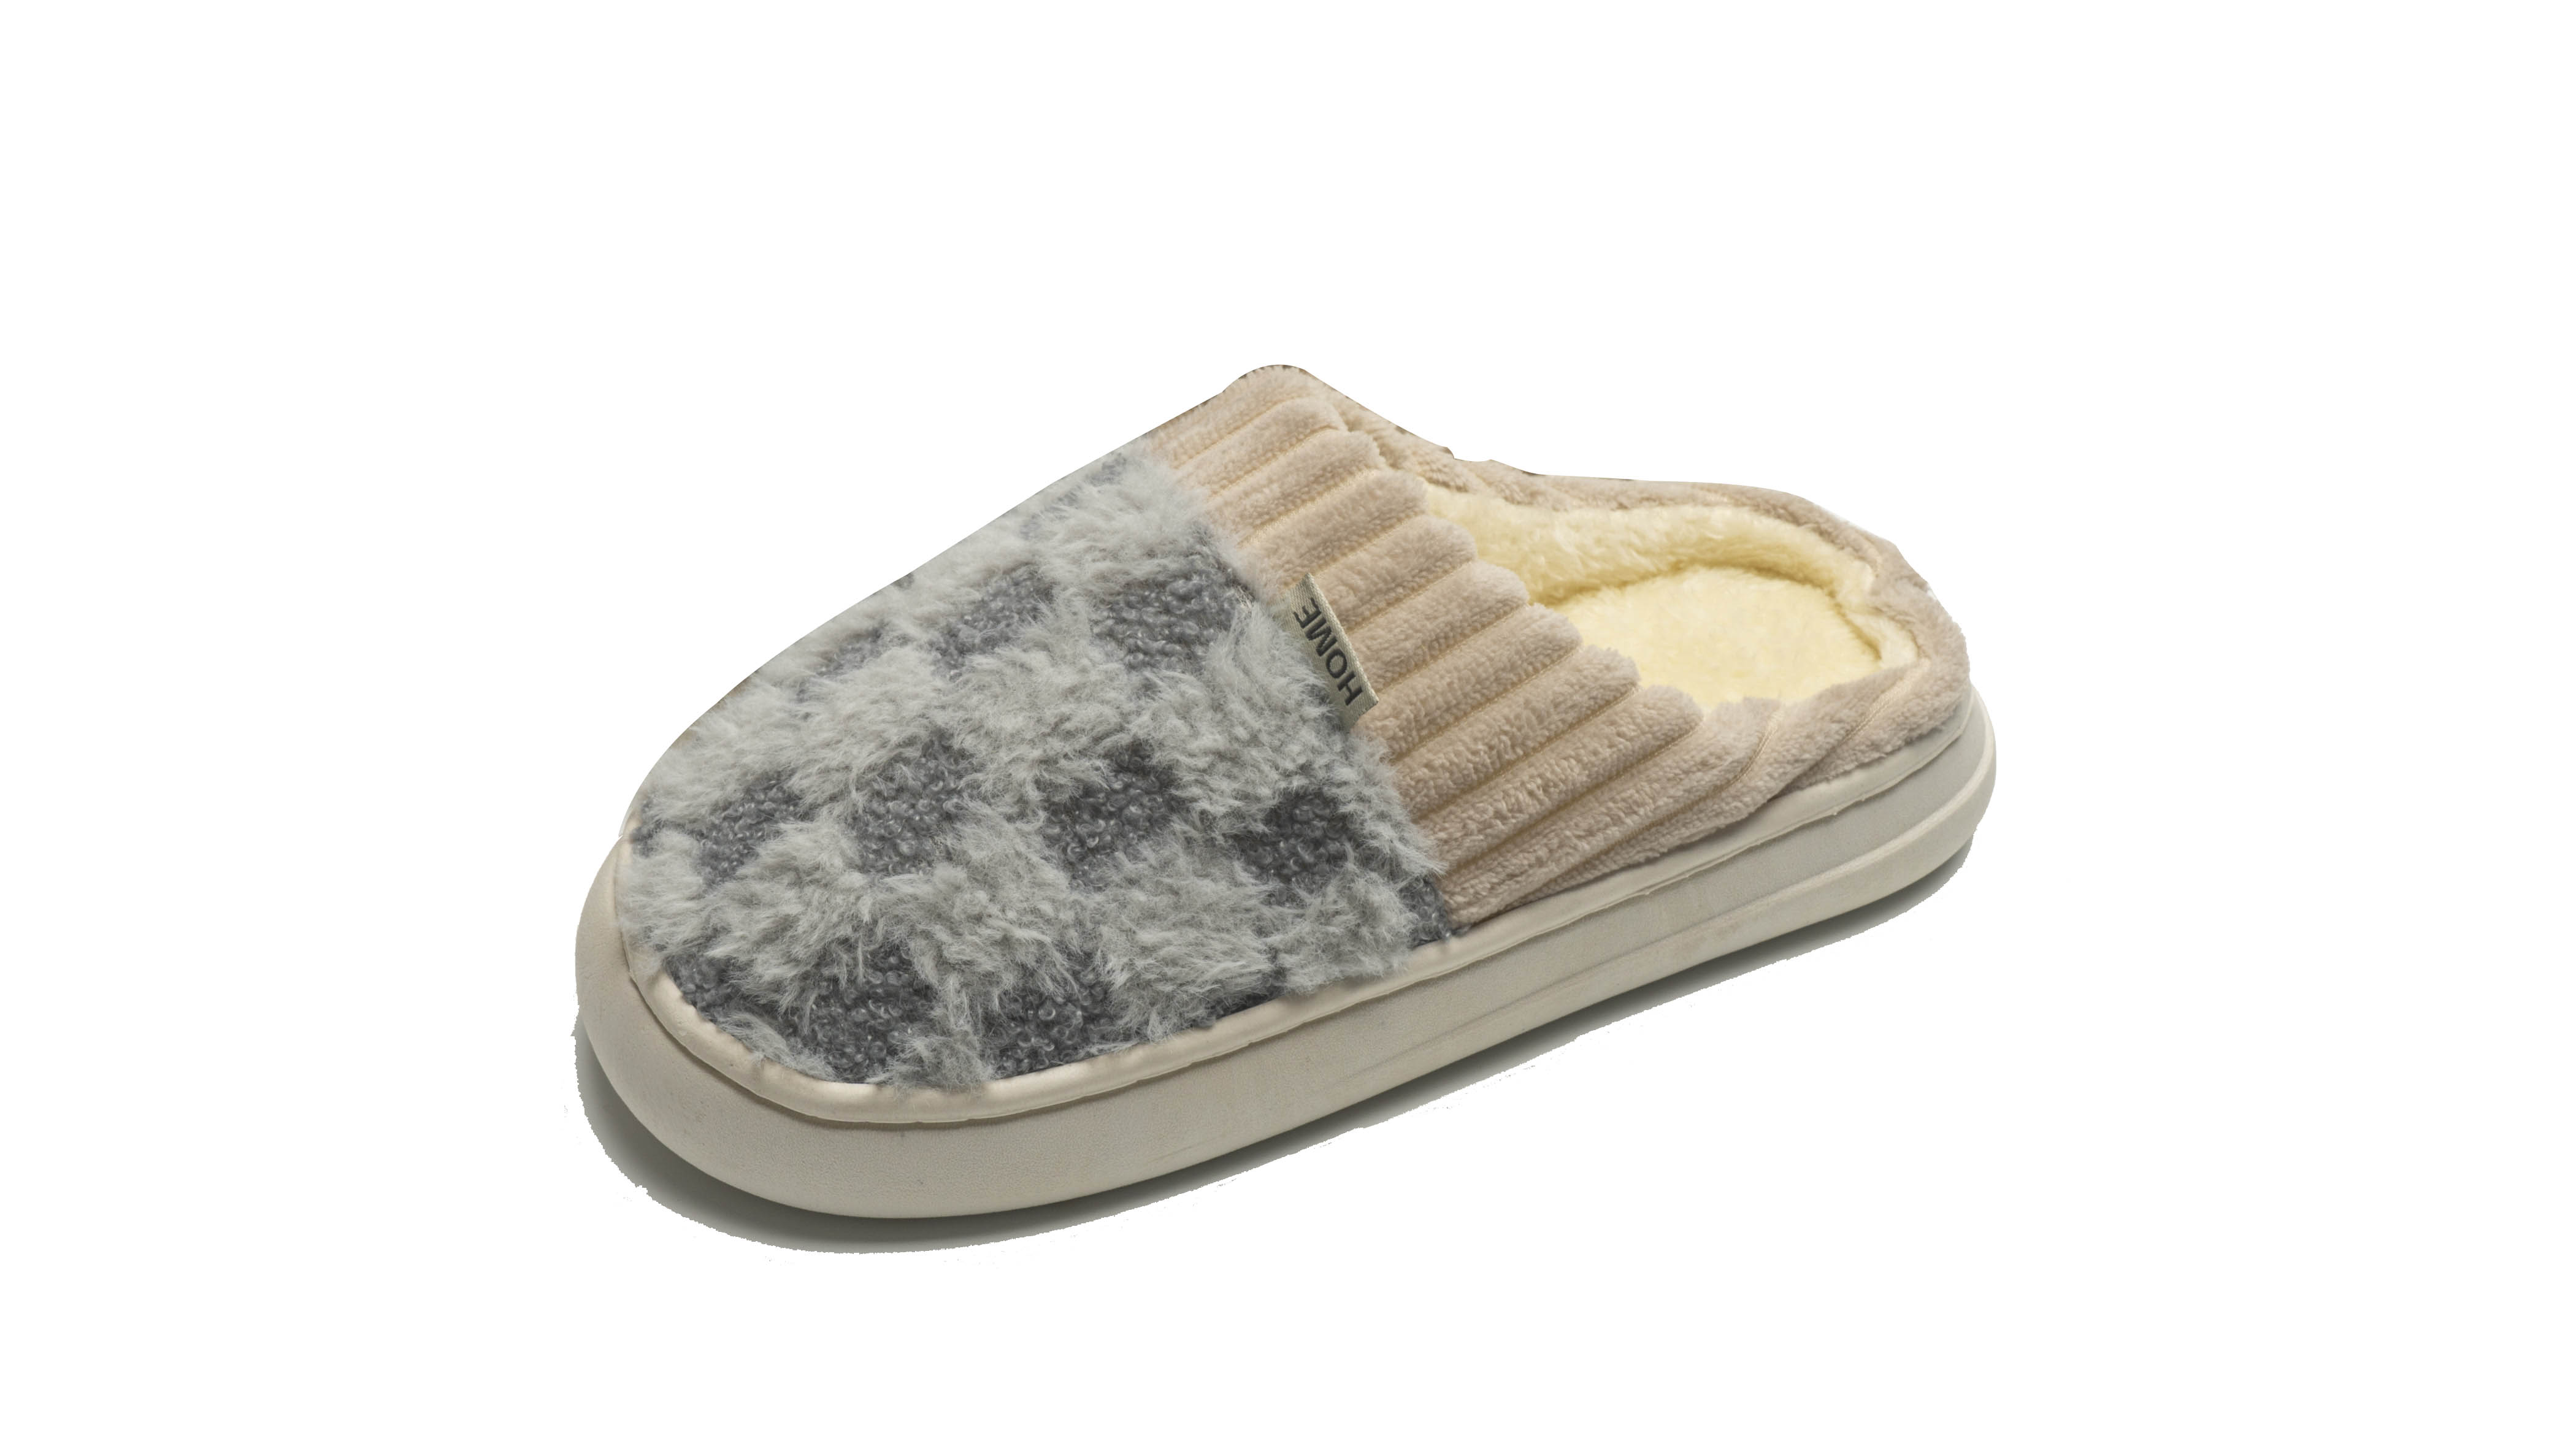 Winter Cotton slippers customize home slippers fashion fur women indoor OEM ODM grid pattern plush slippers